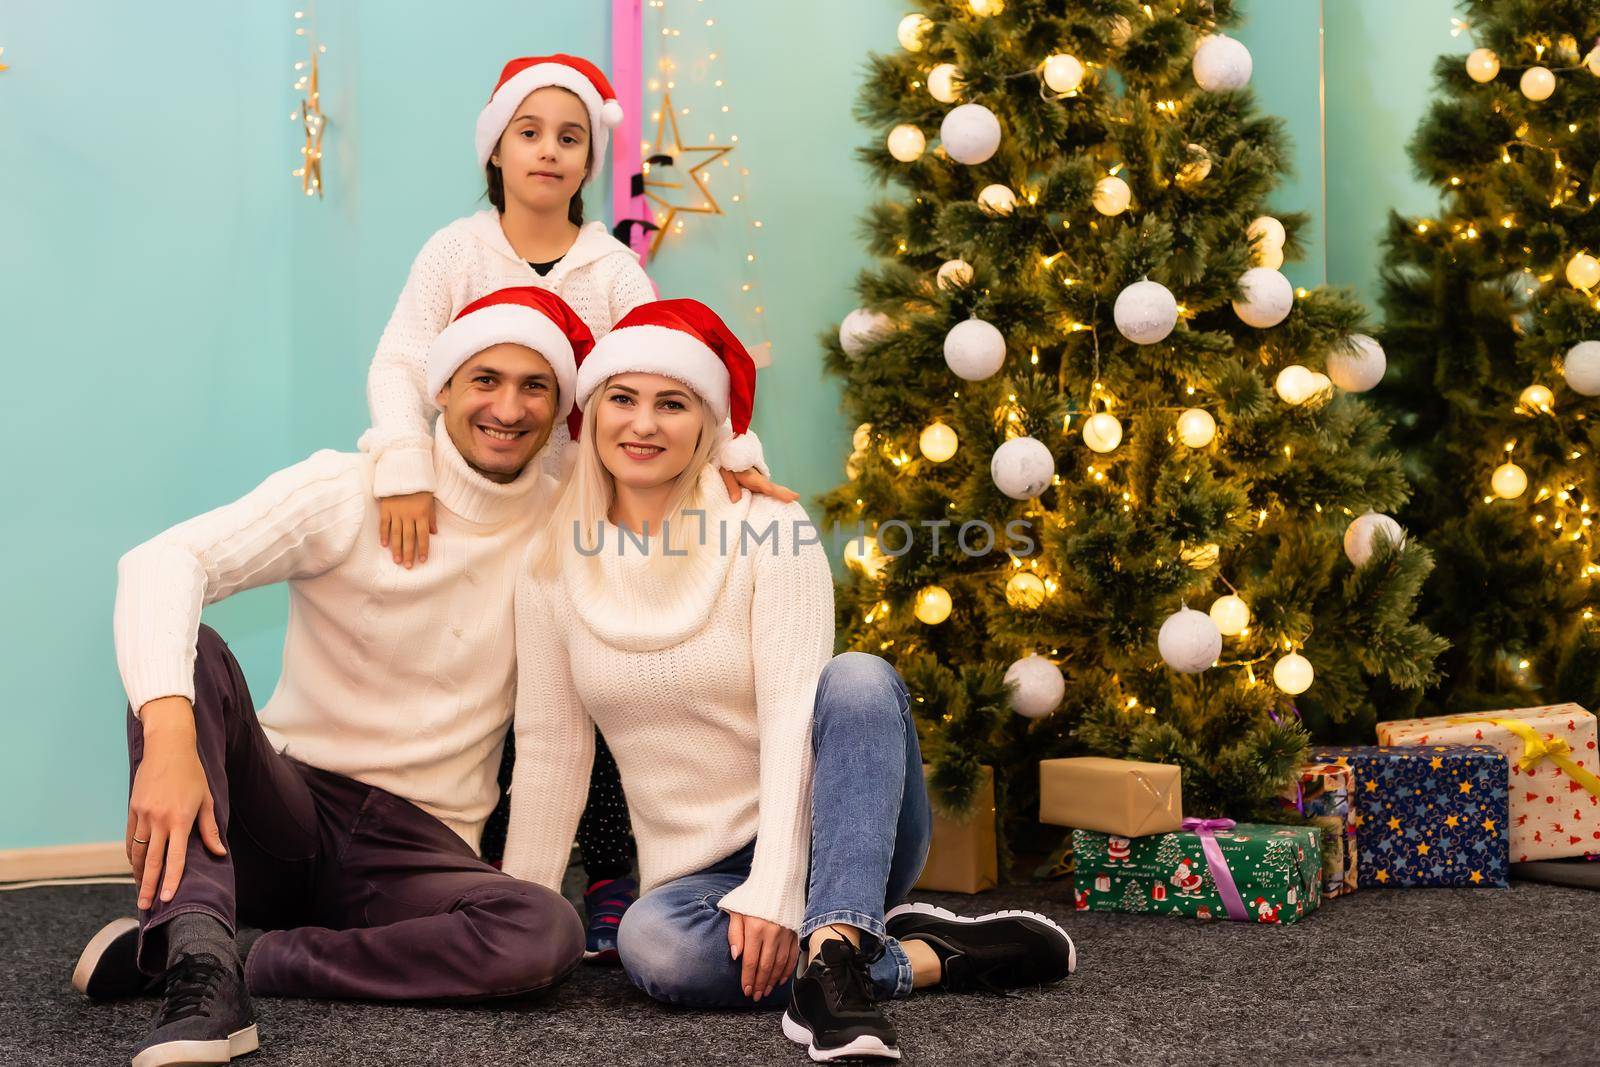 happy young family with one child holding christmas gift and smiling at camera by Andelov13